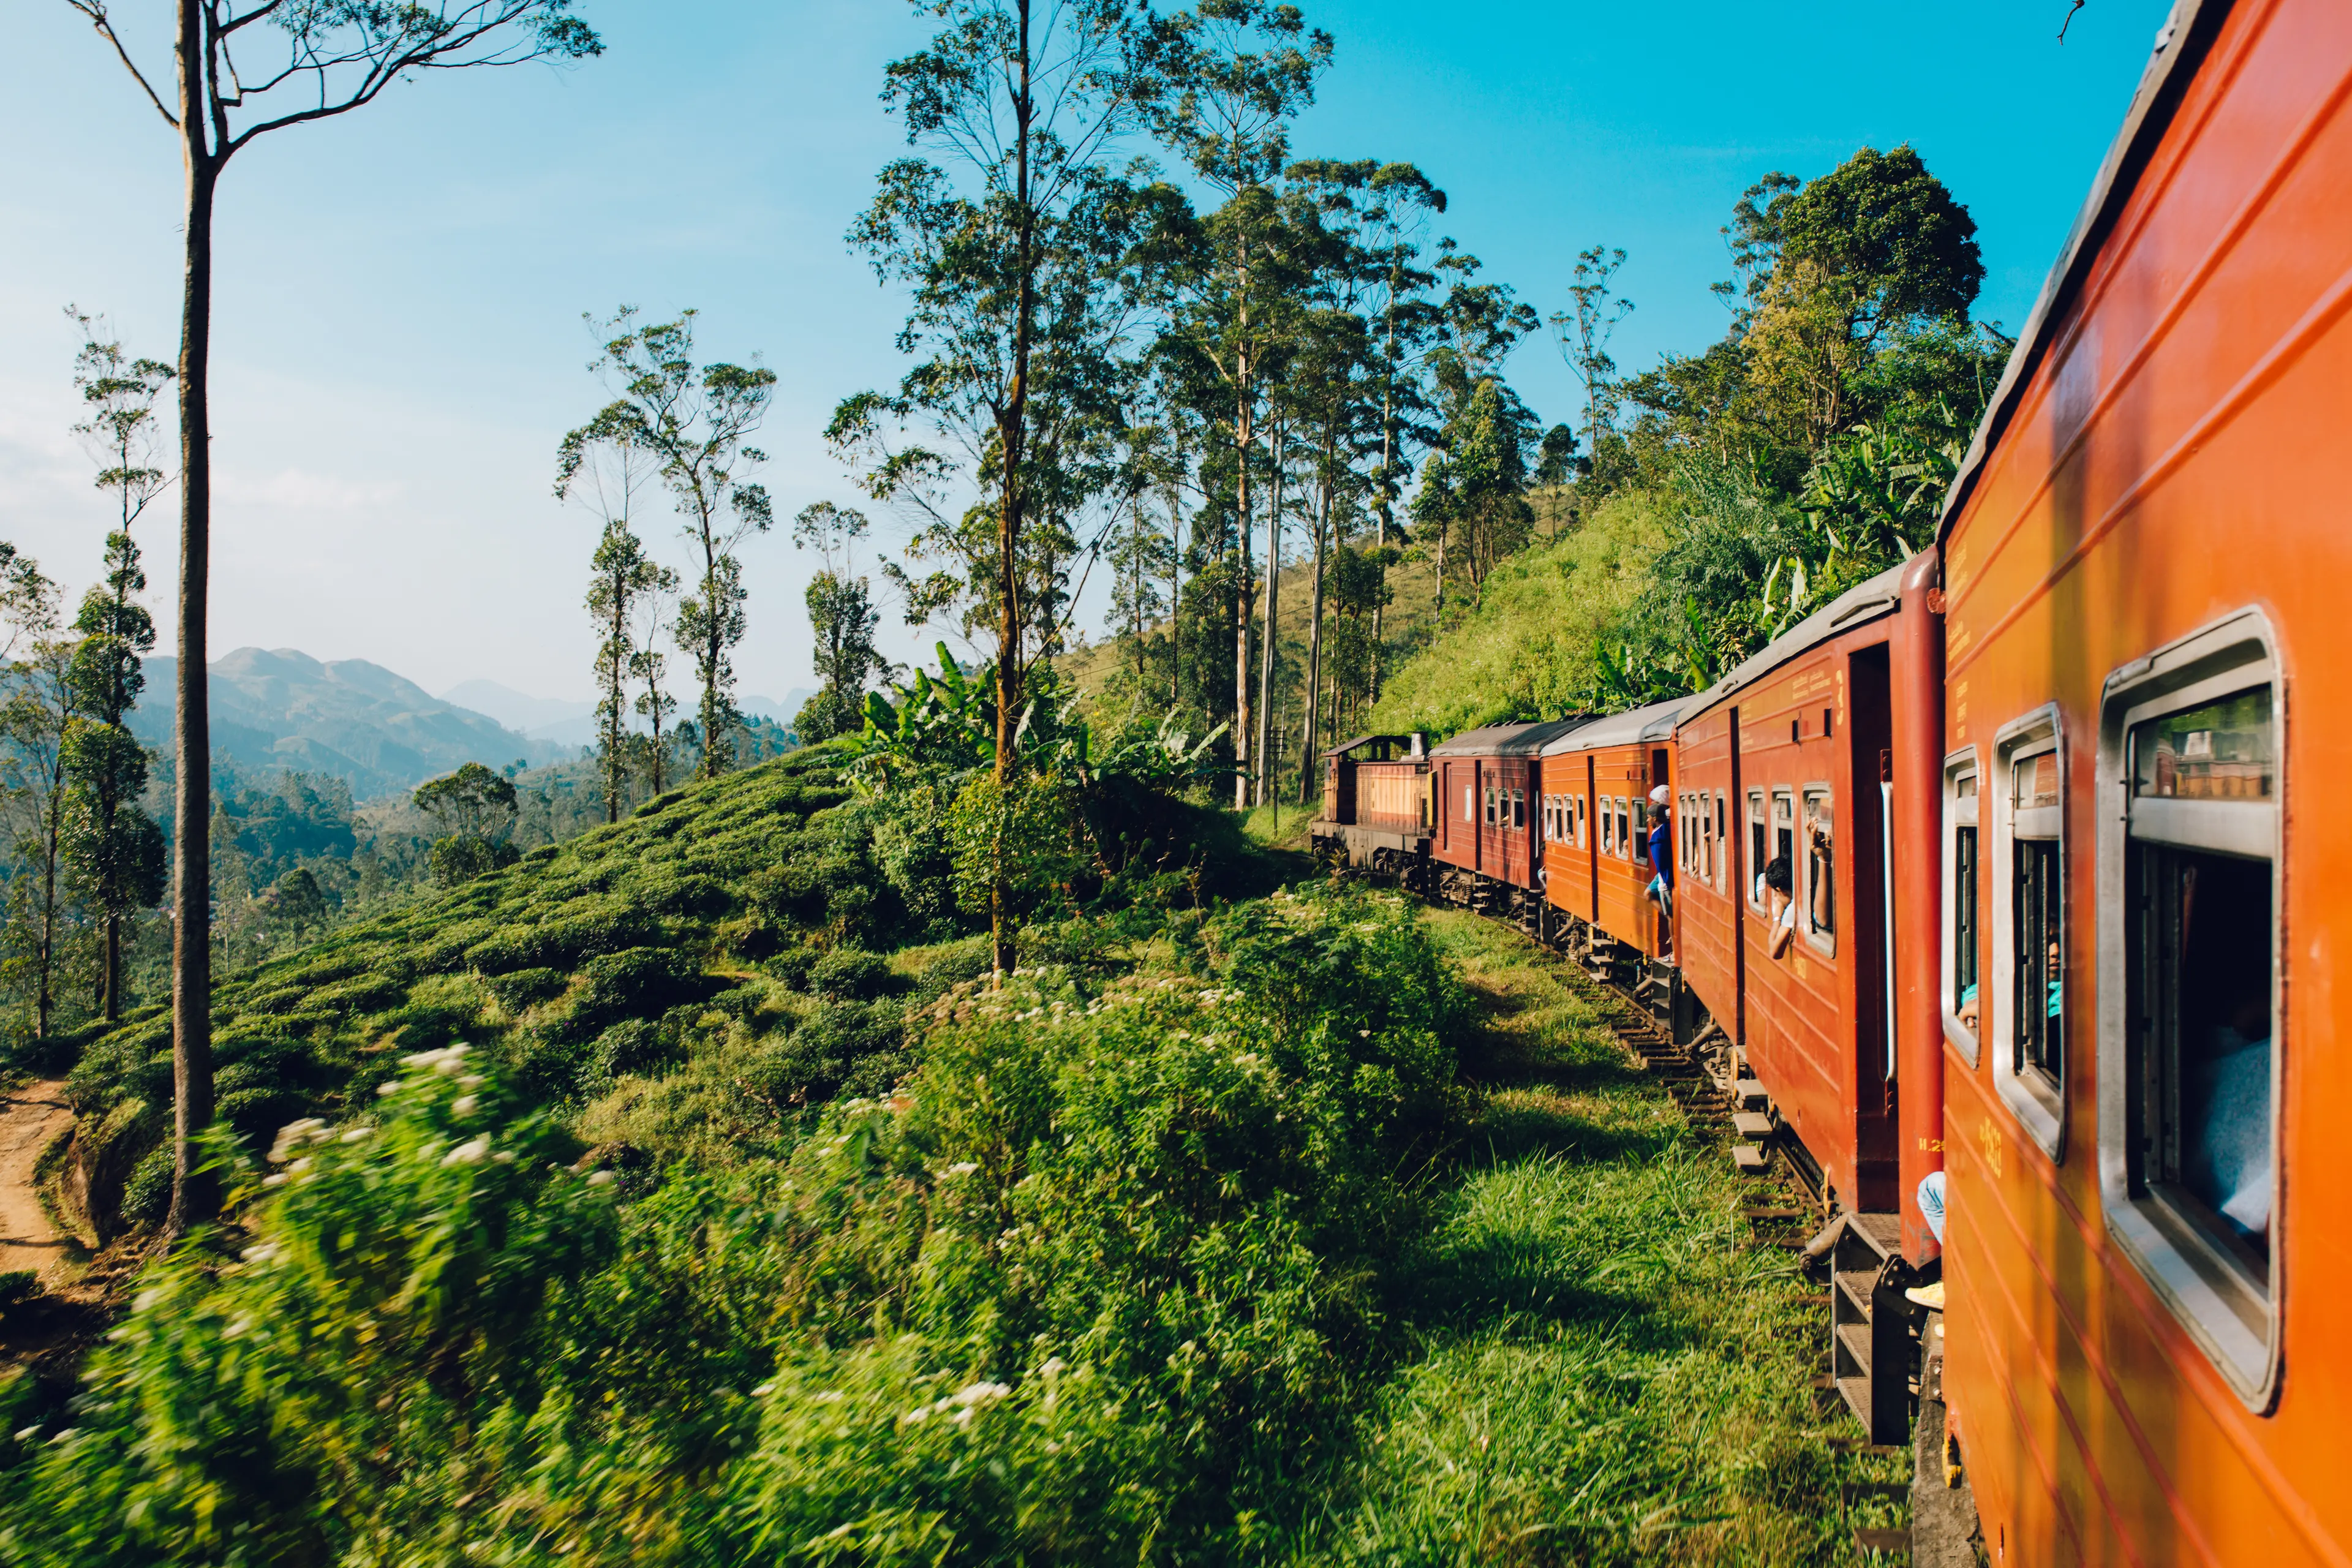 Scenic train ride to Kandy